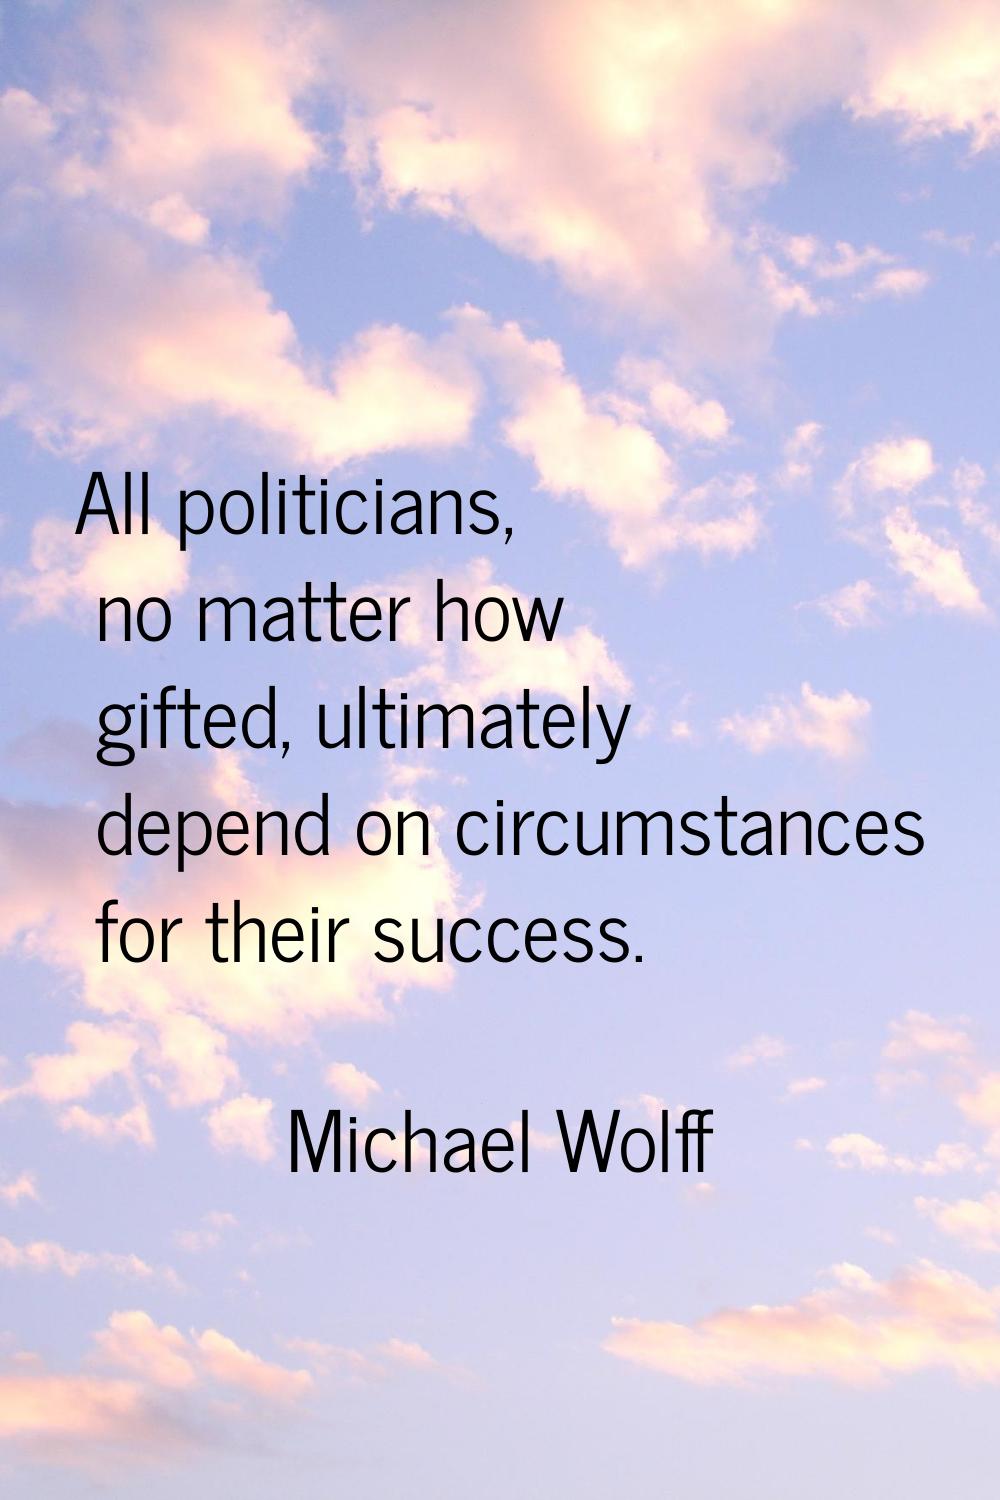 All politicians, no matter how gifted, ultimately depend on circumstances for their success.